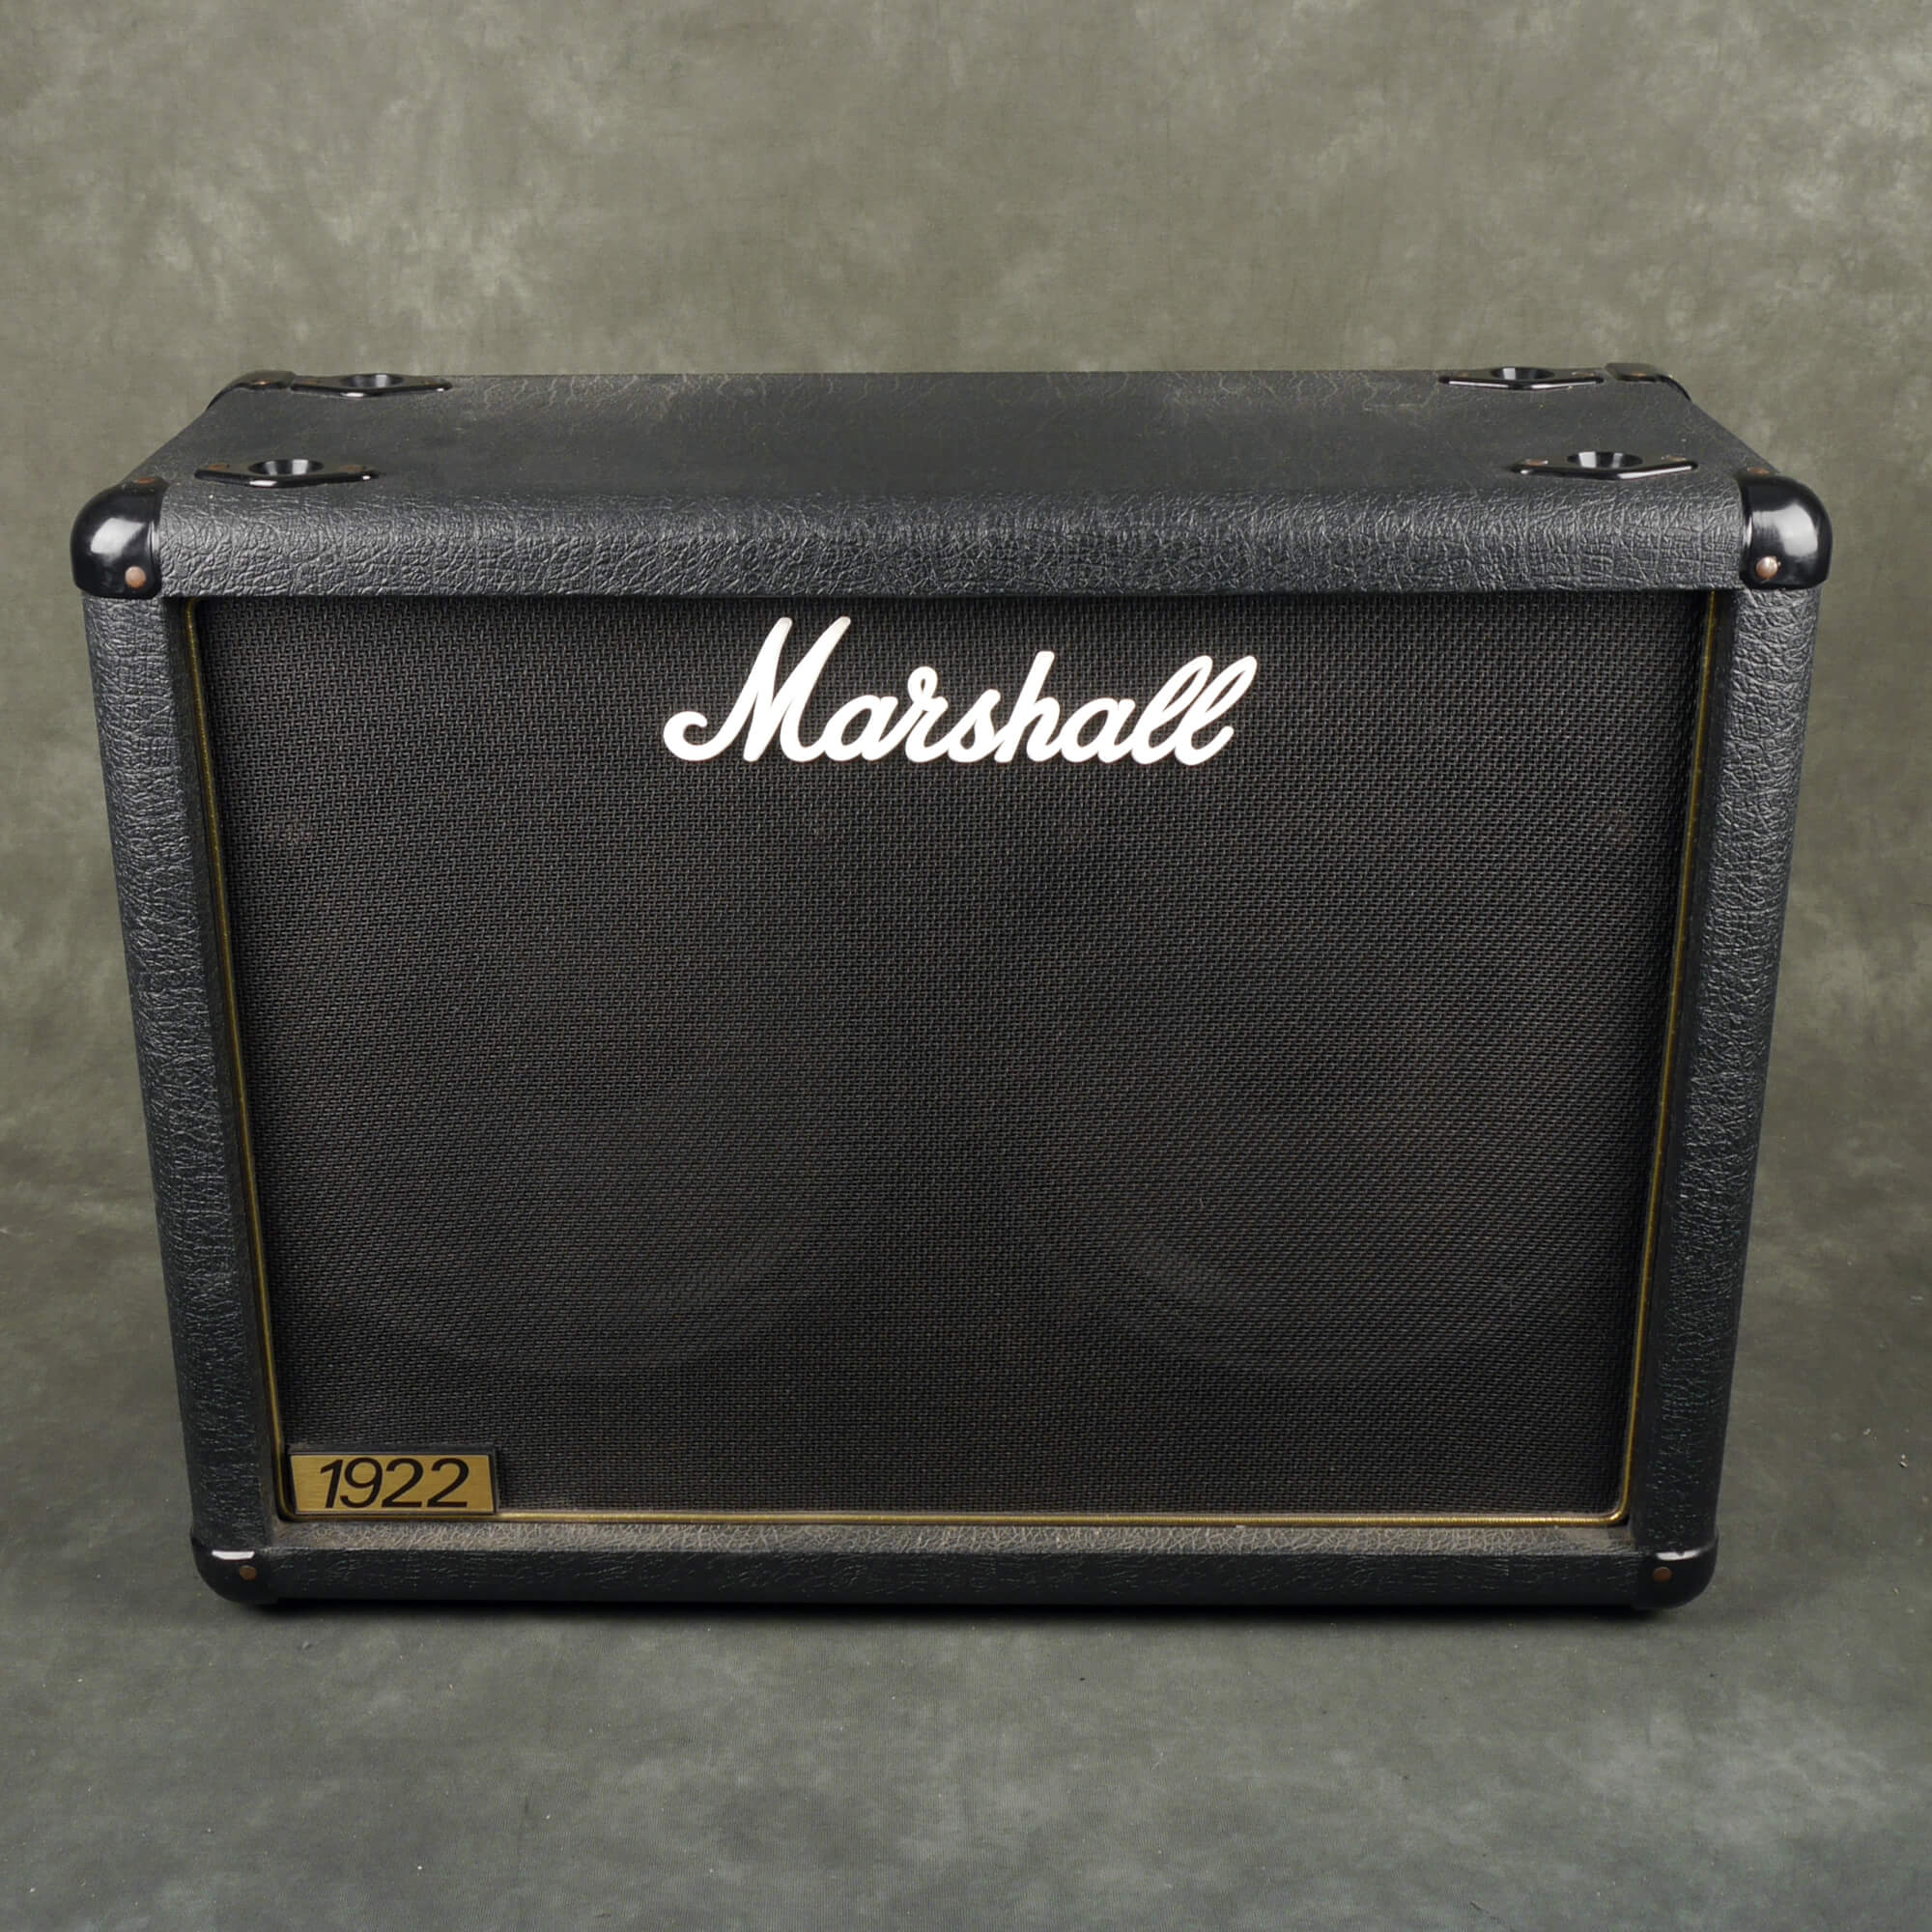 Second Hand Marshall Cabinets Rich Tone Music